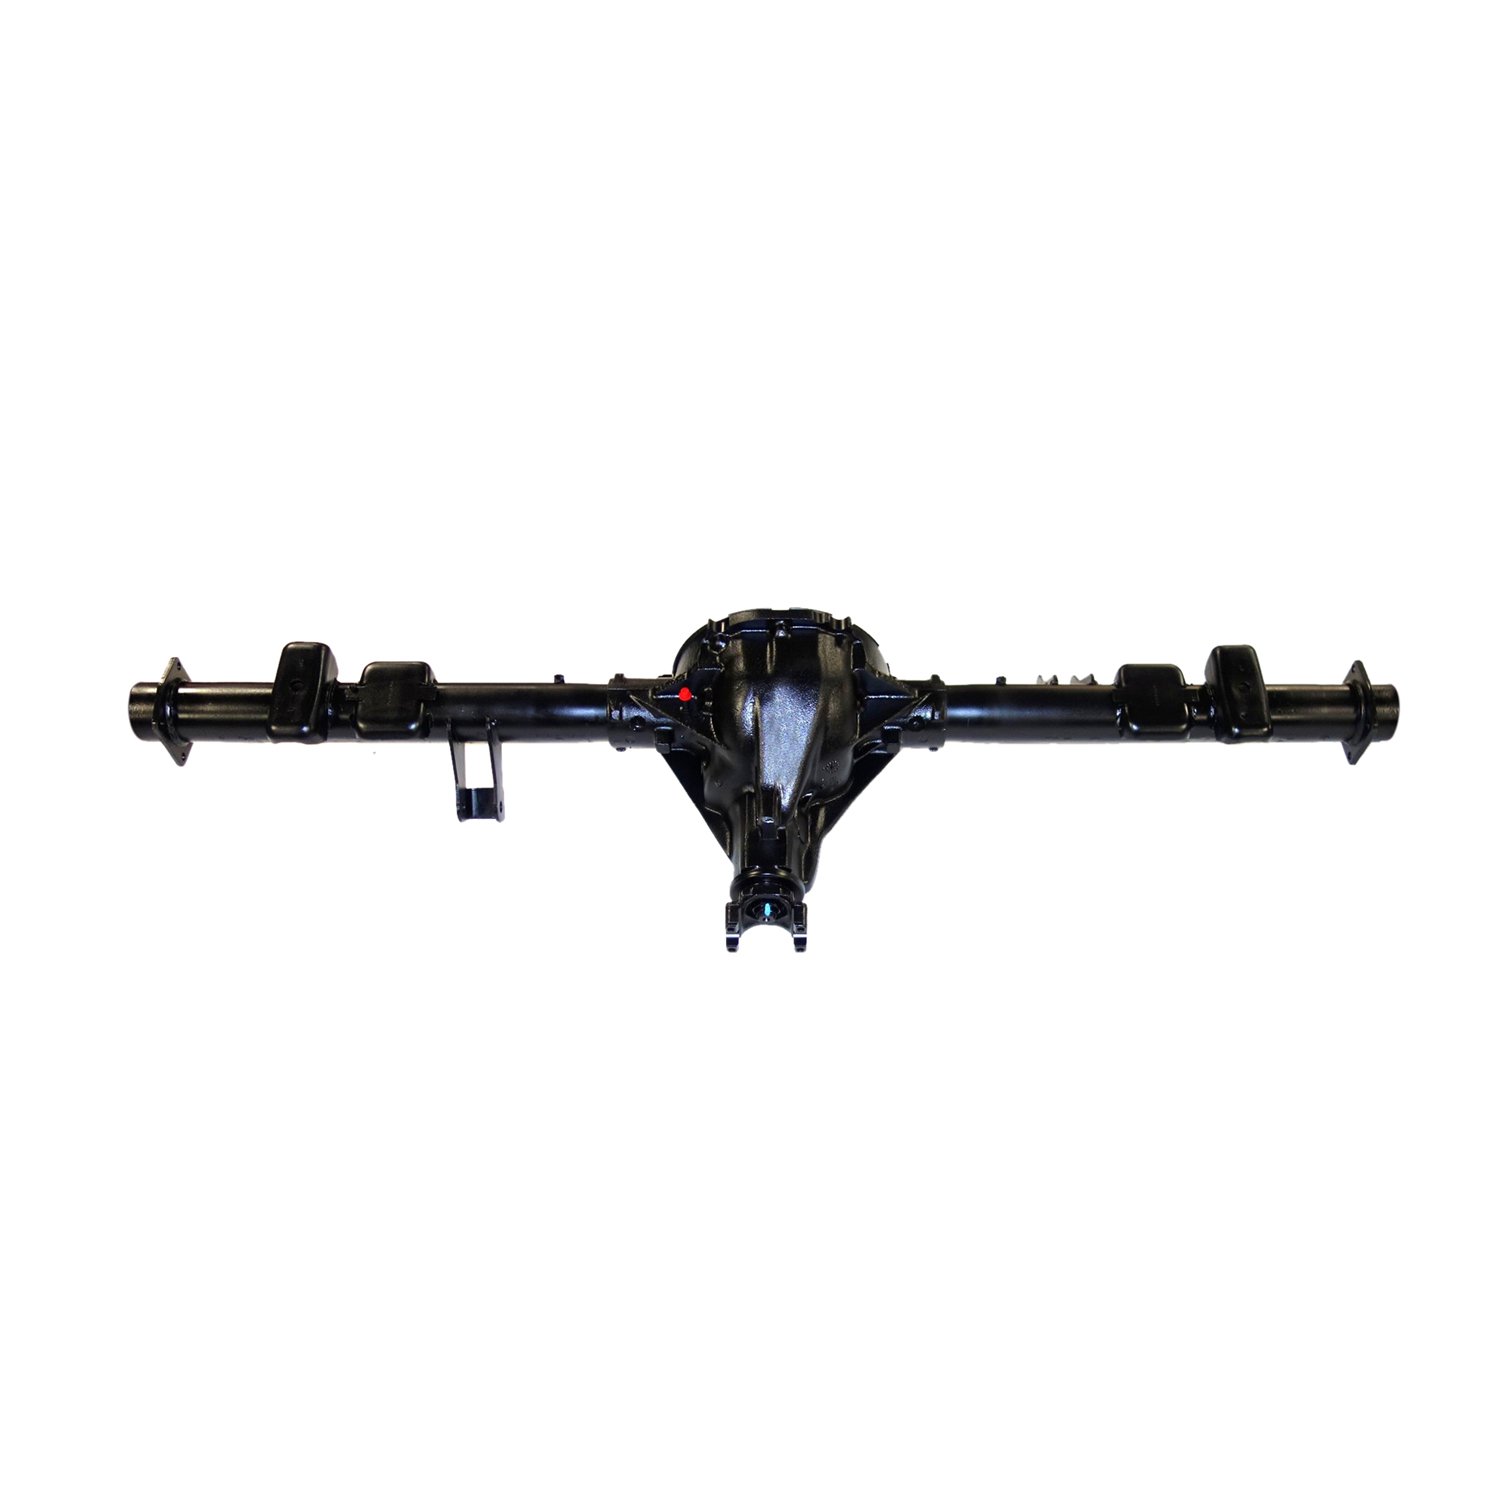 Remanufactured Axle Assy for GM 8.5" 1995 Tahoe & GMC Yukon 3.08 , 2wd, 2dr, Posi LSD